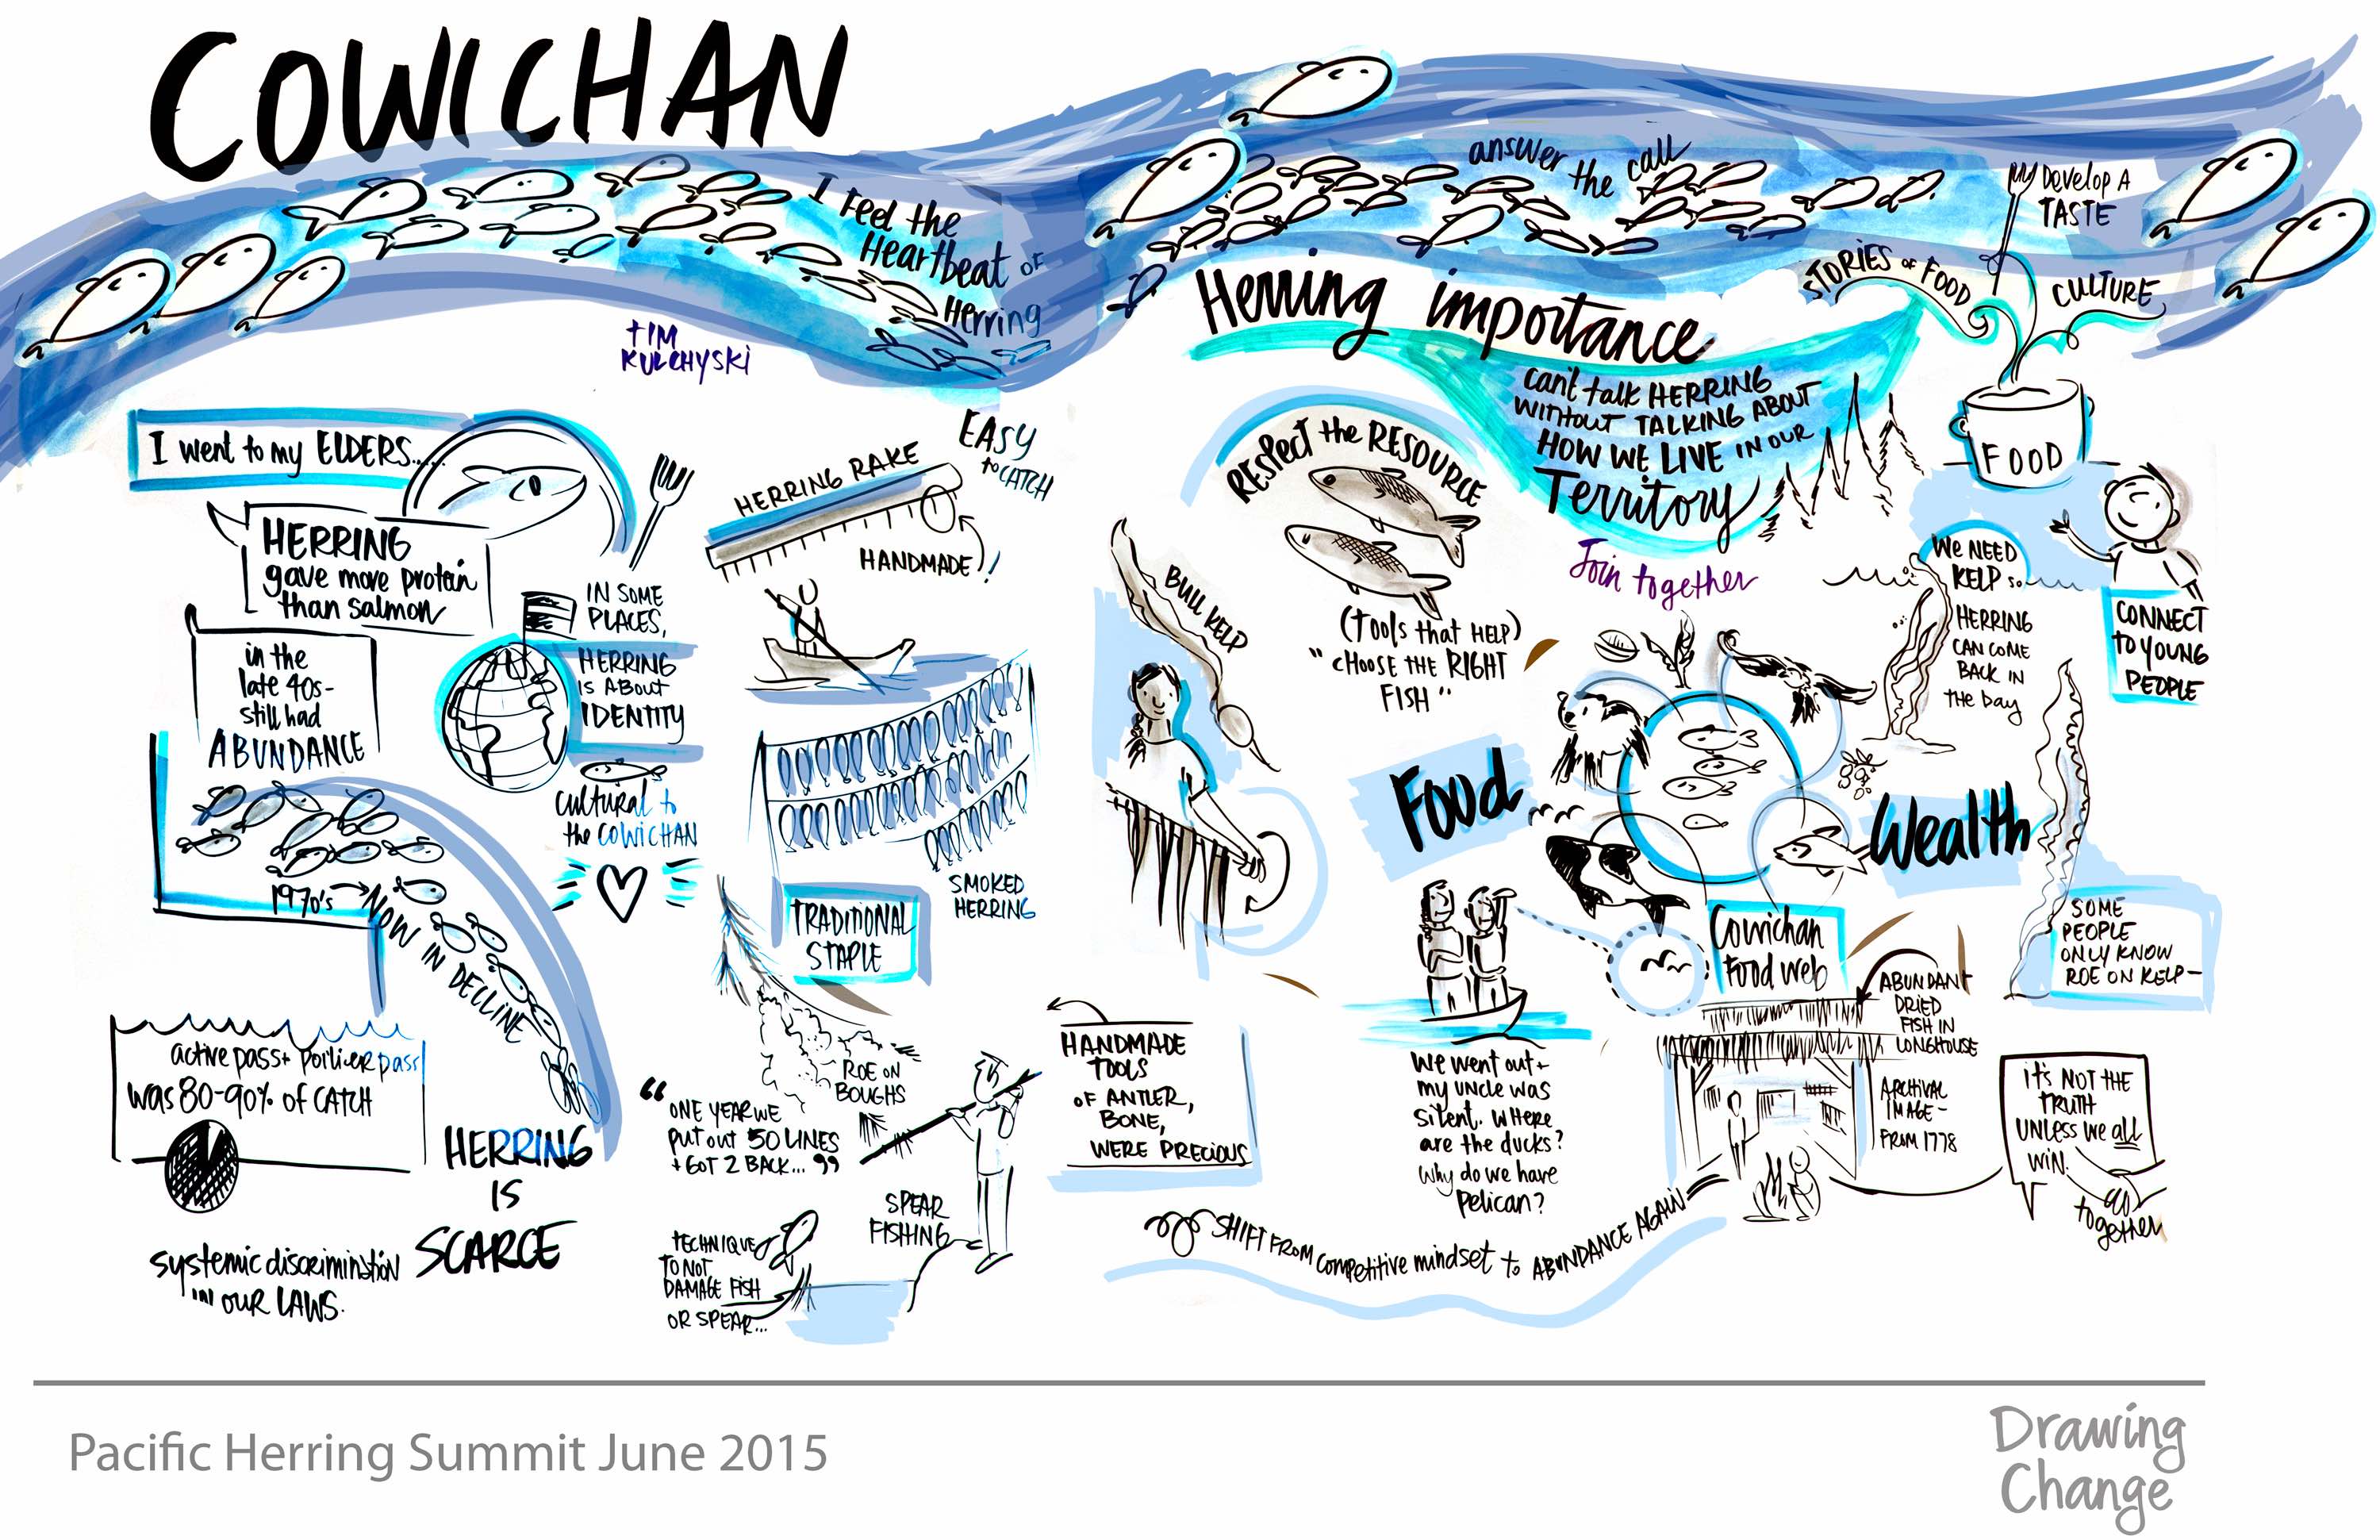 Pacific Herring Summit Cowichan graphic recording